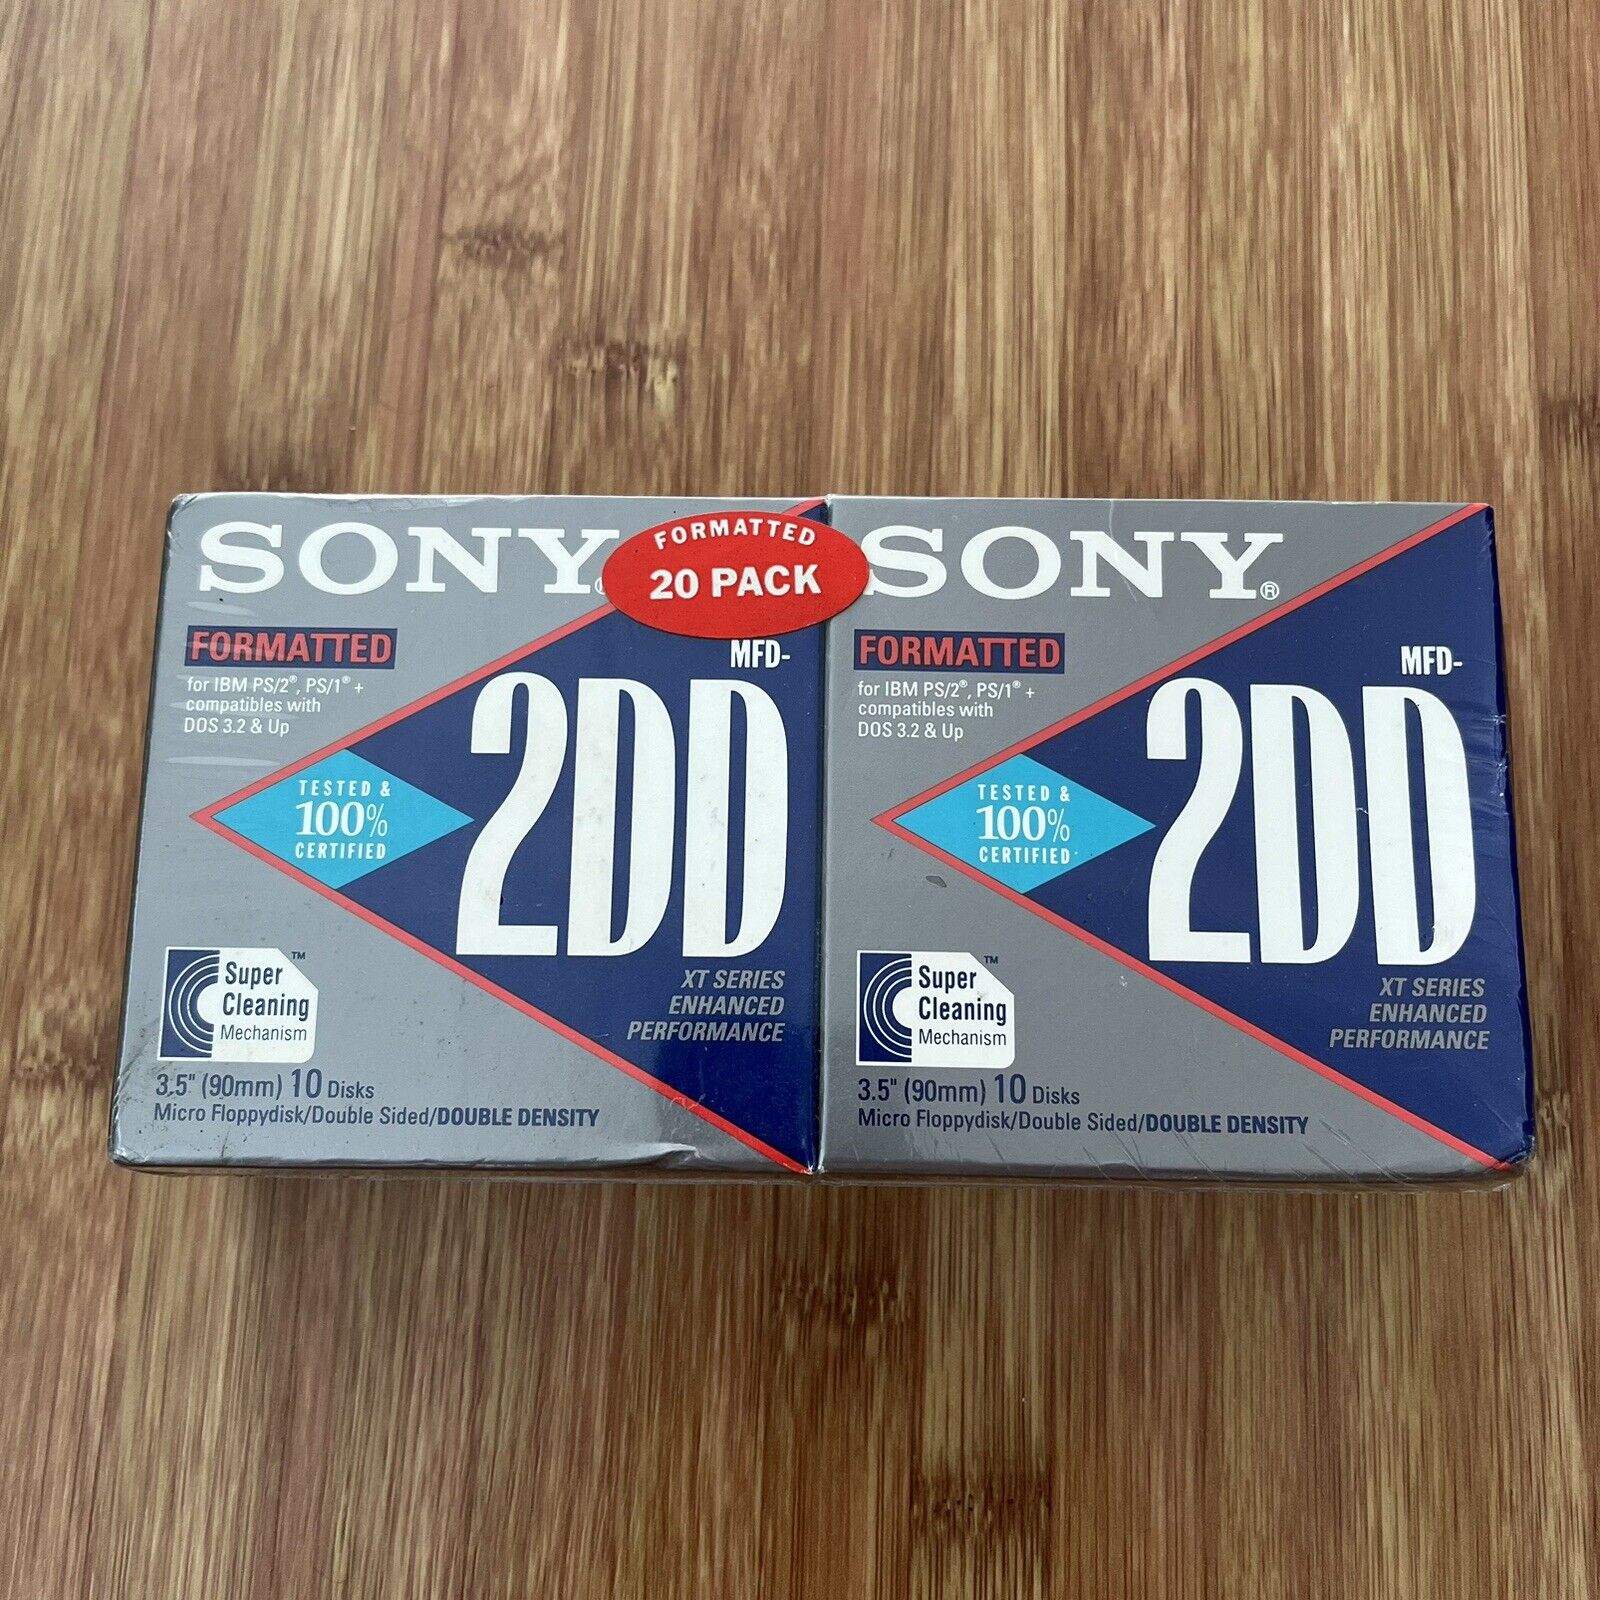 NOS Sony MFD-2DD 3.5 Double Density Micro Floppy Disk 20 Pack Sealed